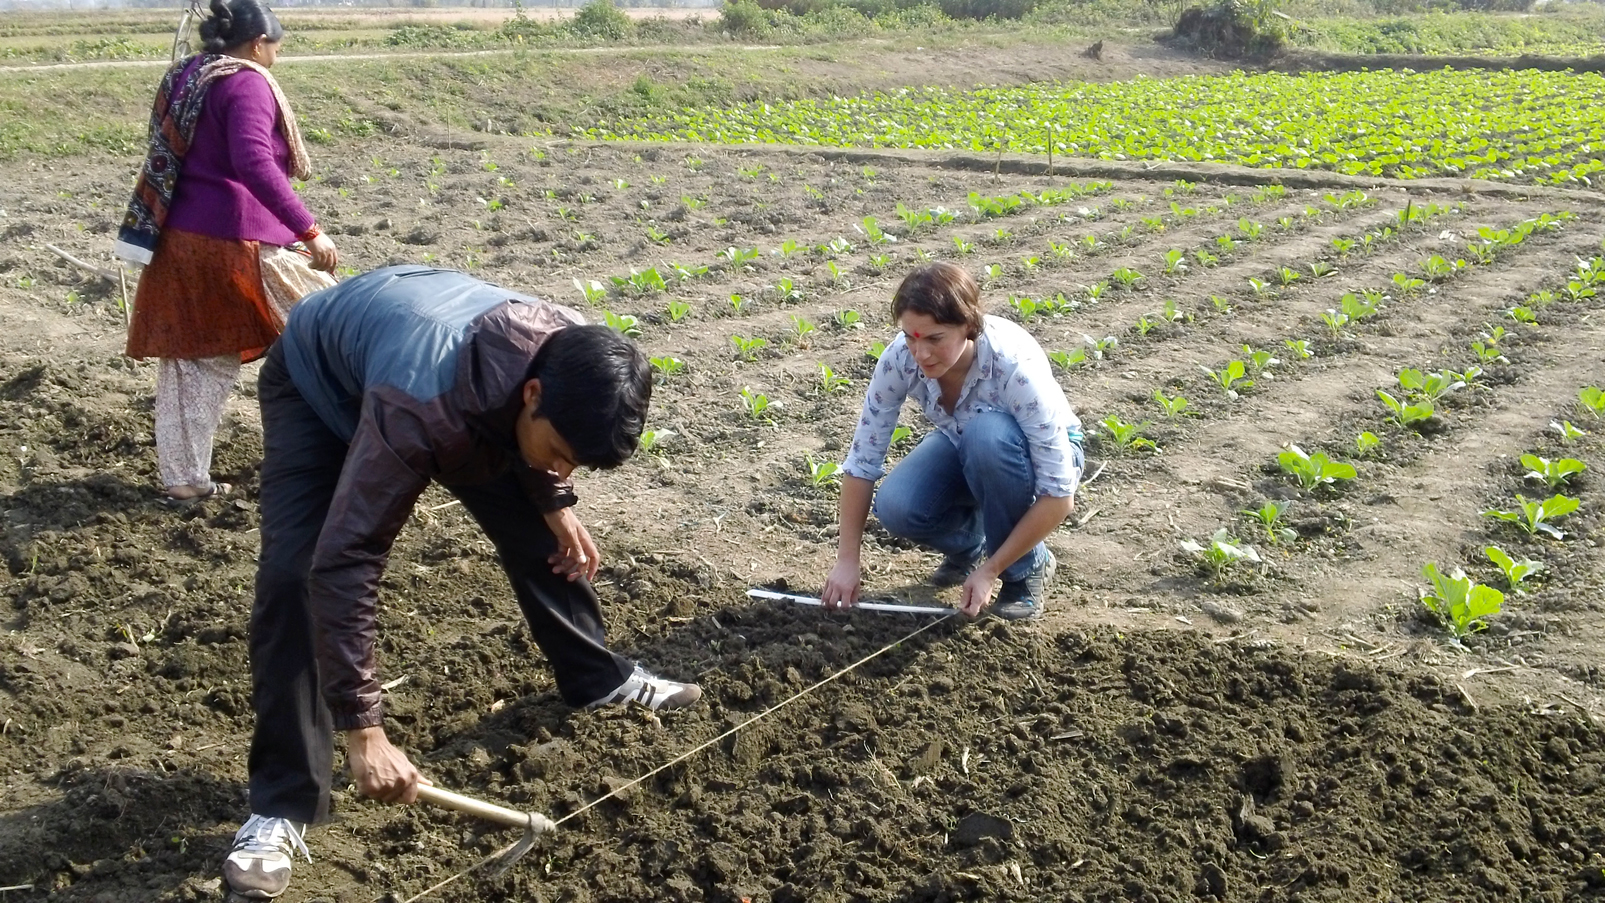 Students measure out a plot in a field